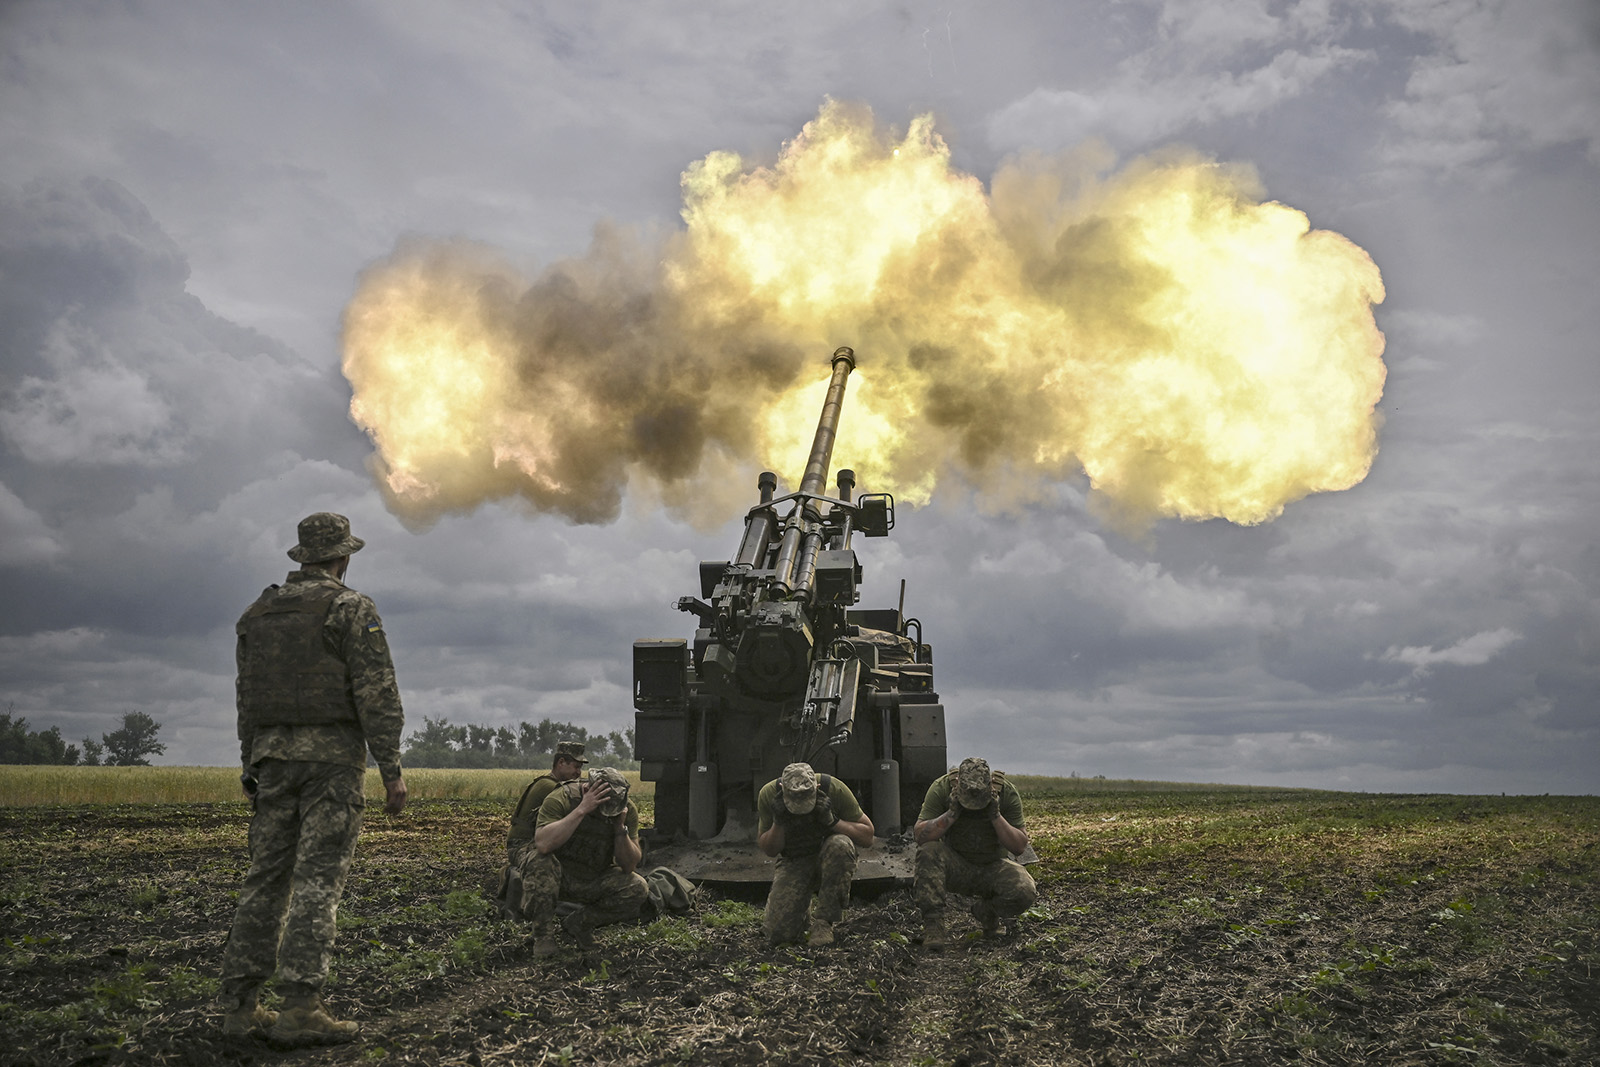 Ukrainian servicemen fire a French self-propelled 155 mm/52-calibre Caesar gun towards Russian positions near the front line in the eastern Ukrainian region of Donbas on June 15.